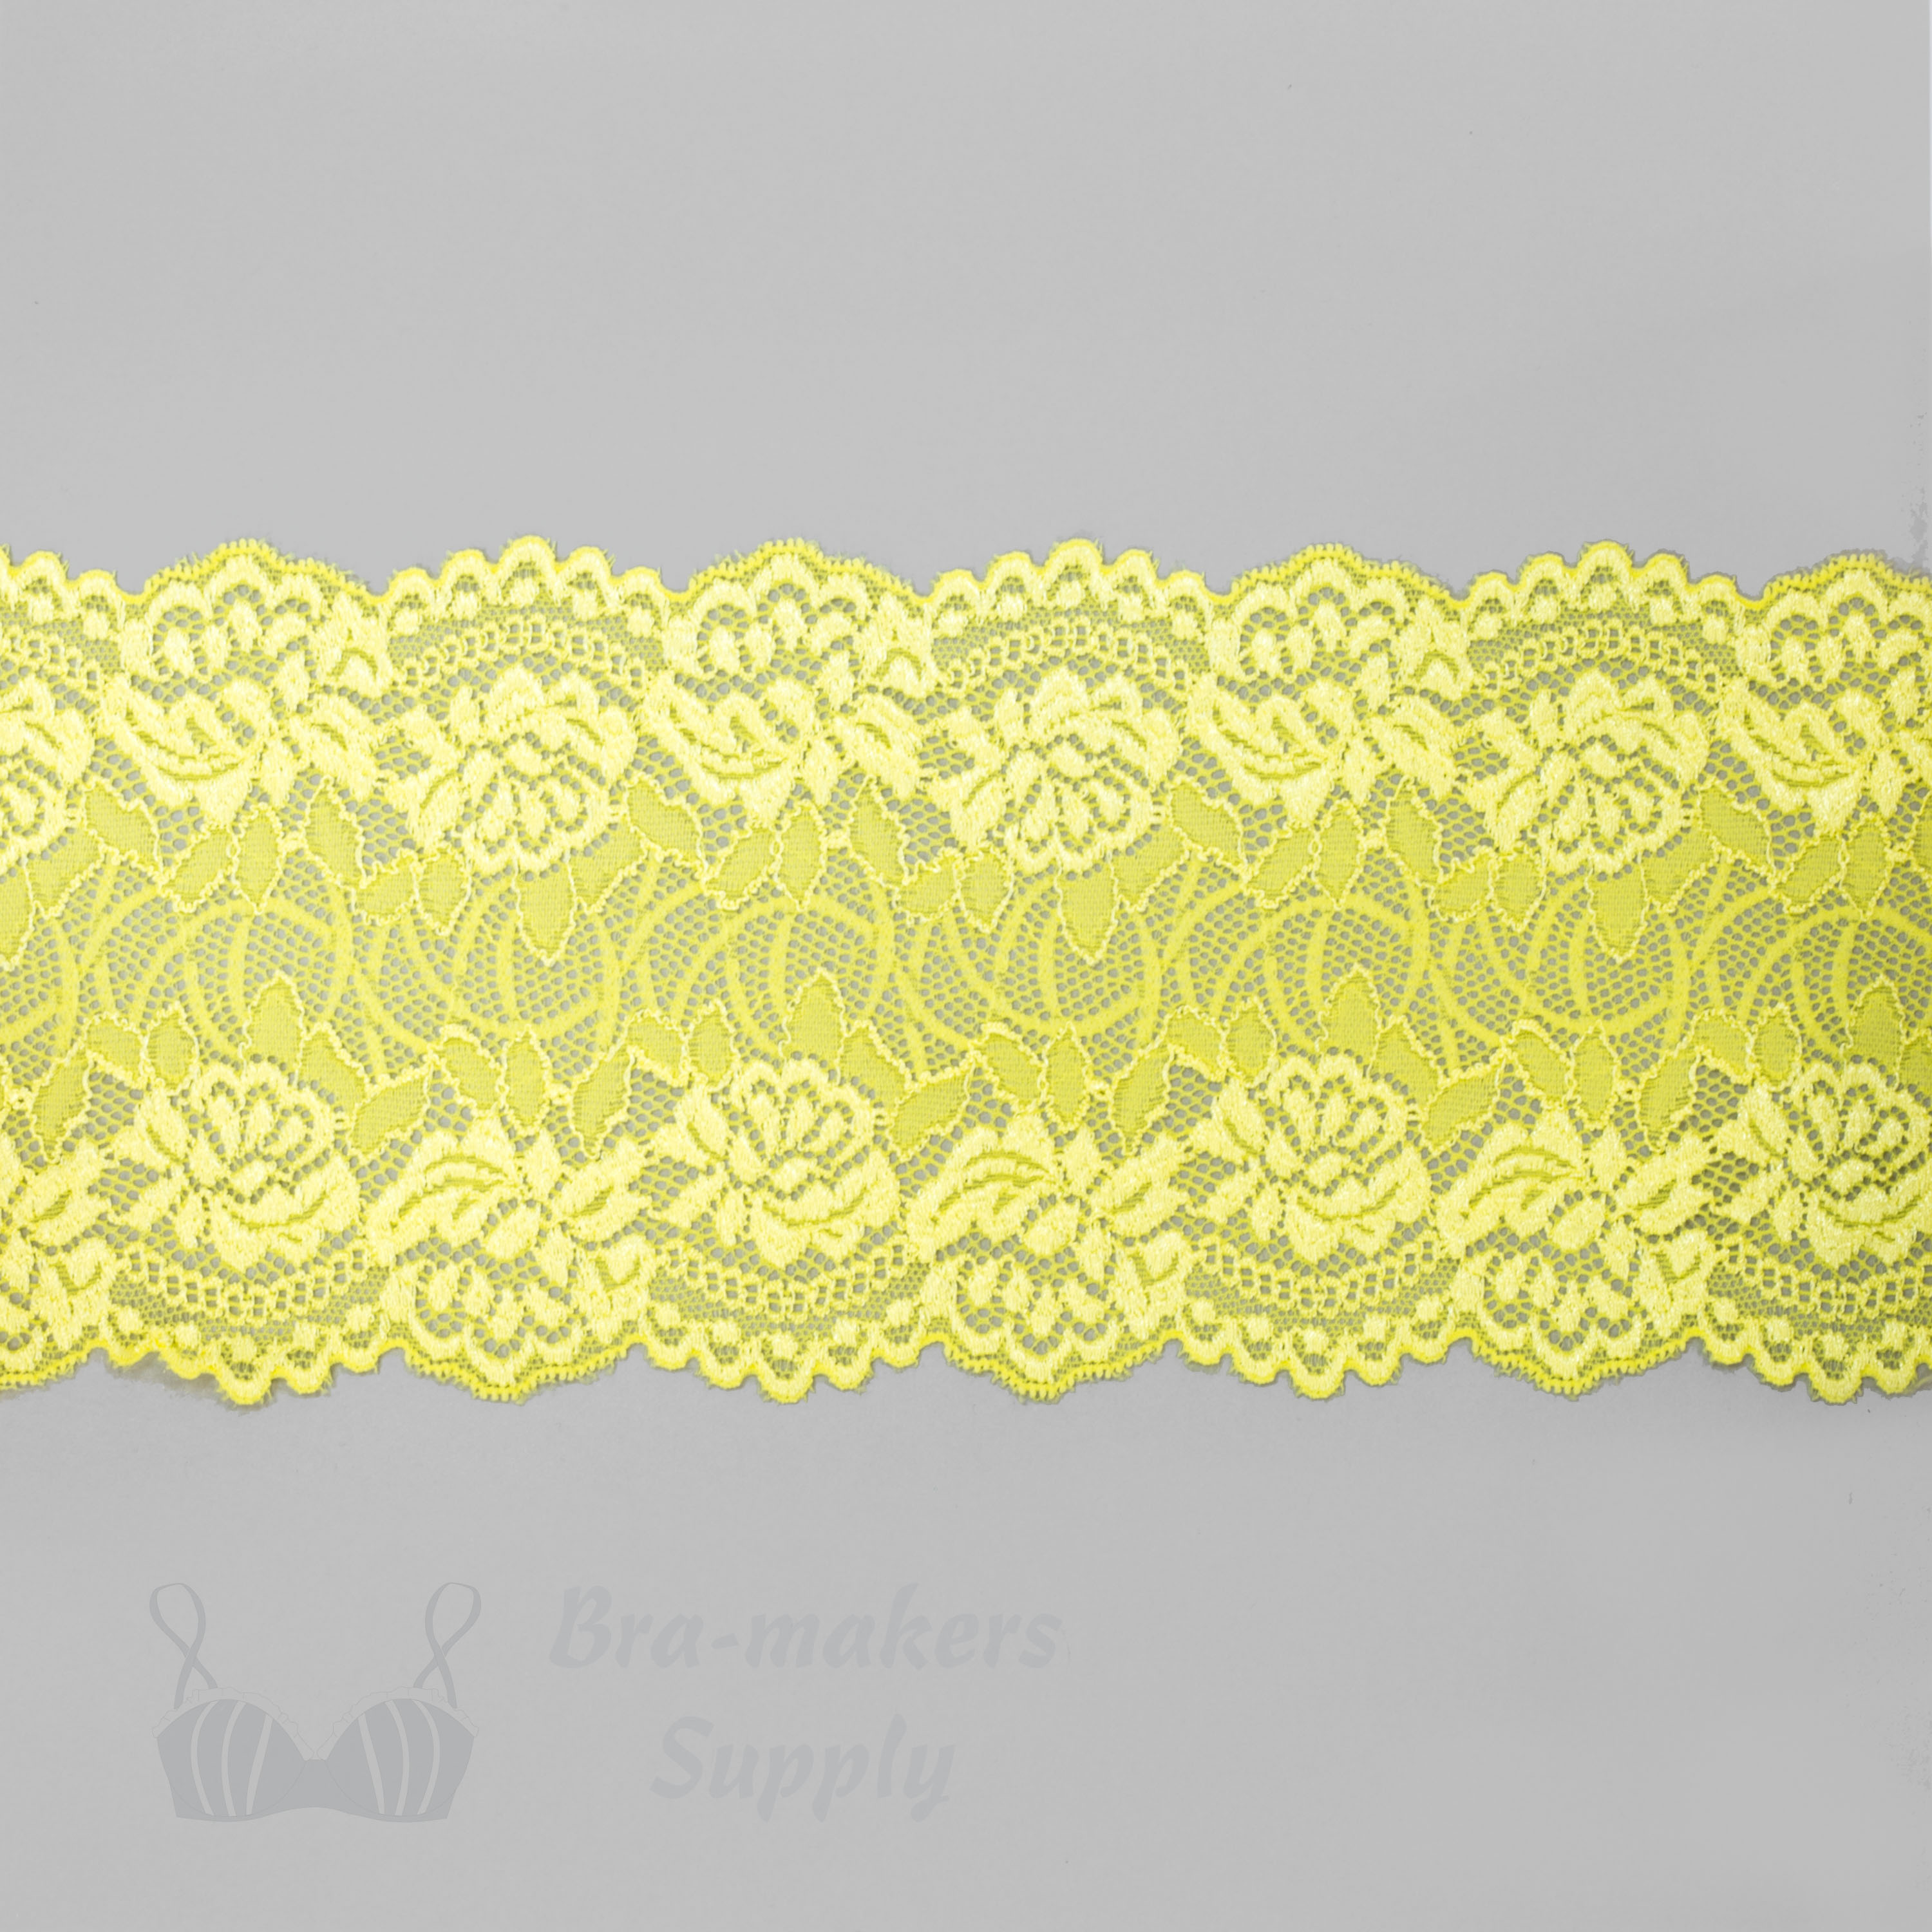 Five Inch Bright Yellow Floral Stretch Lace